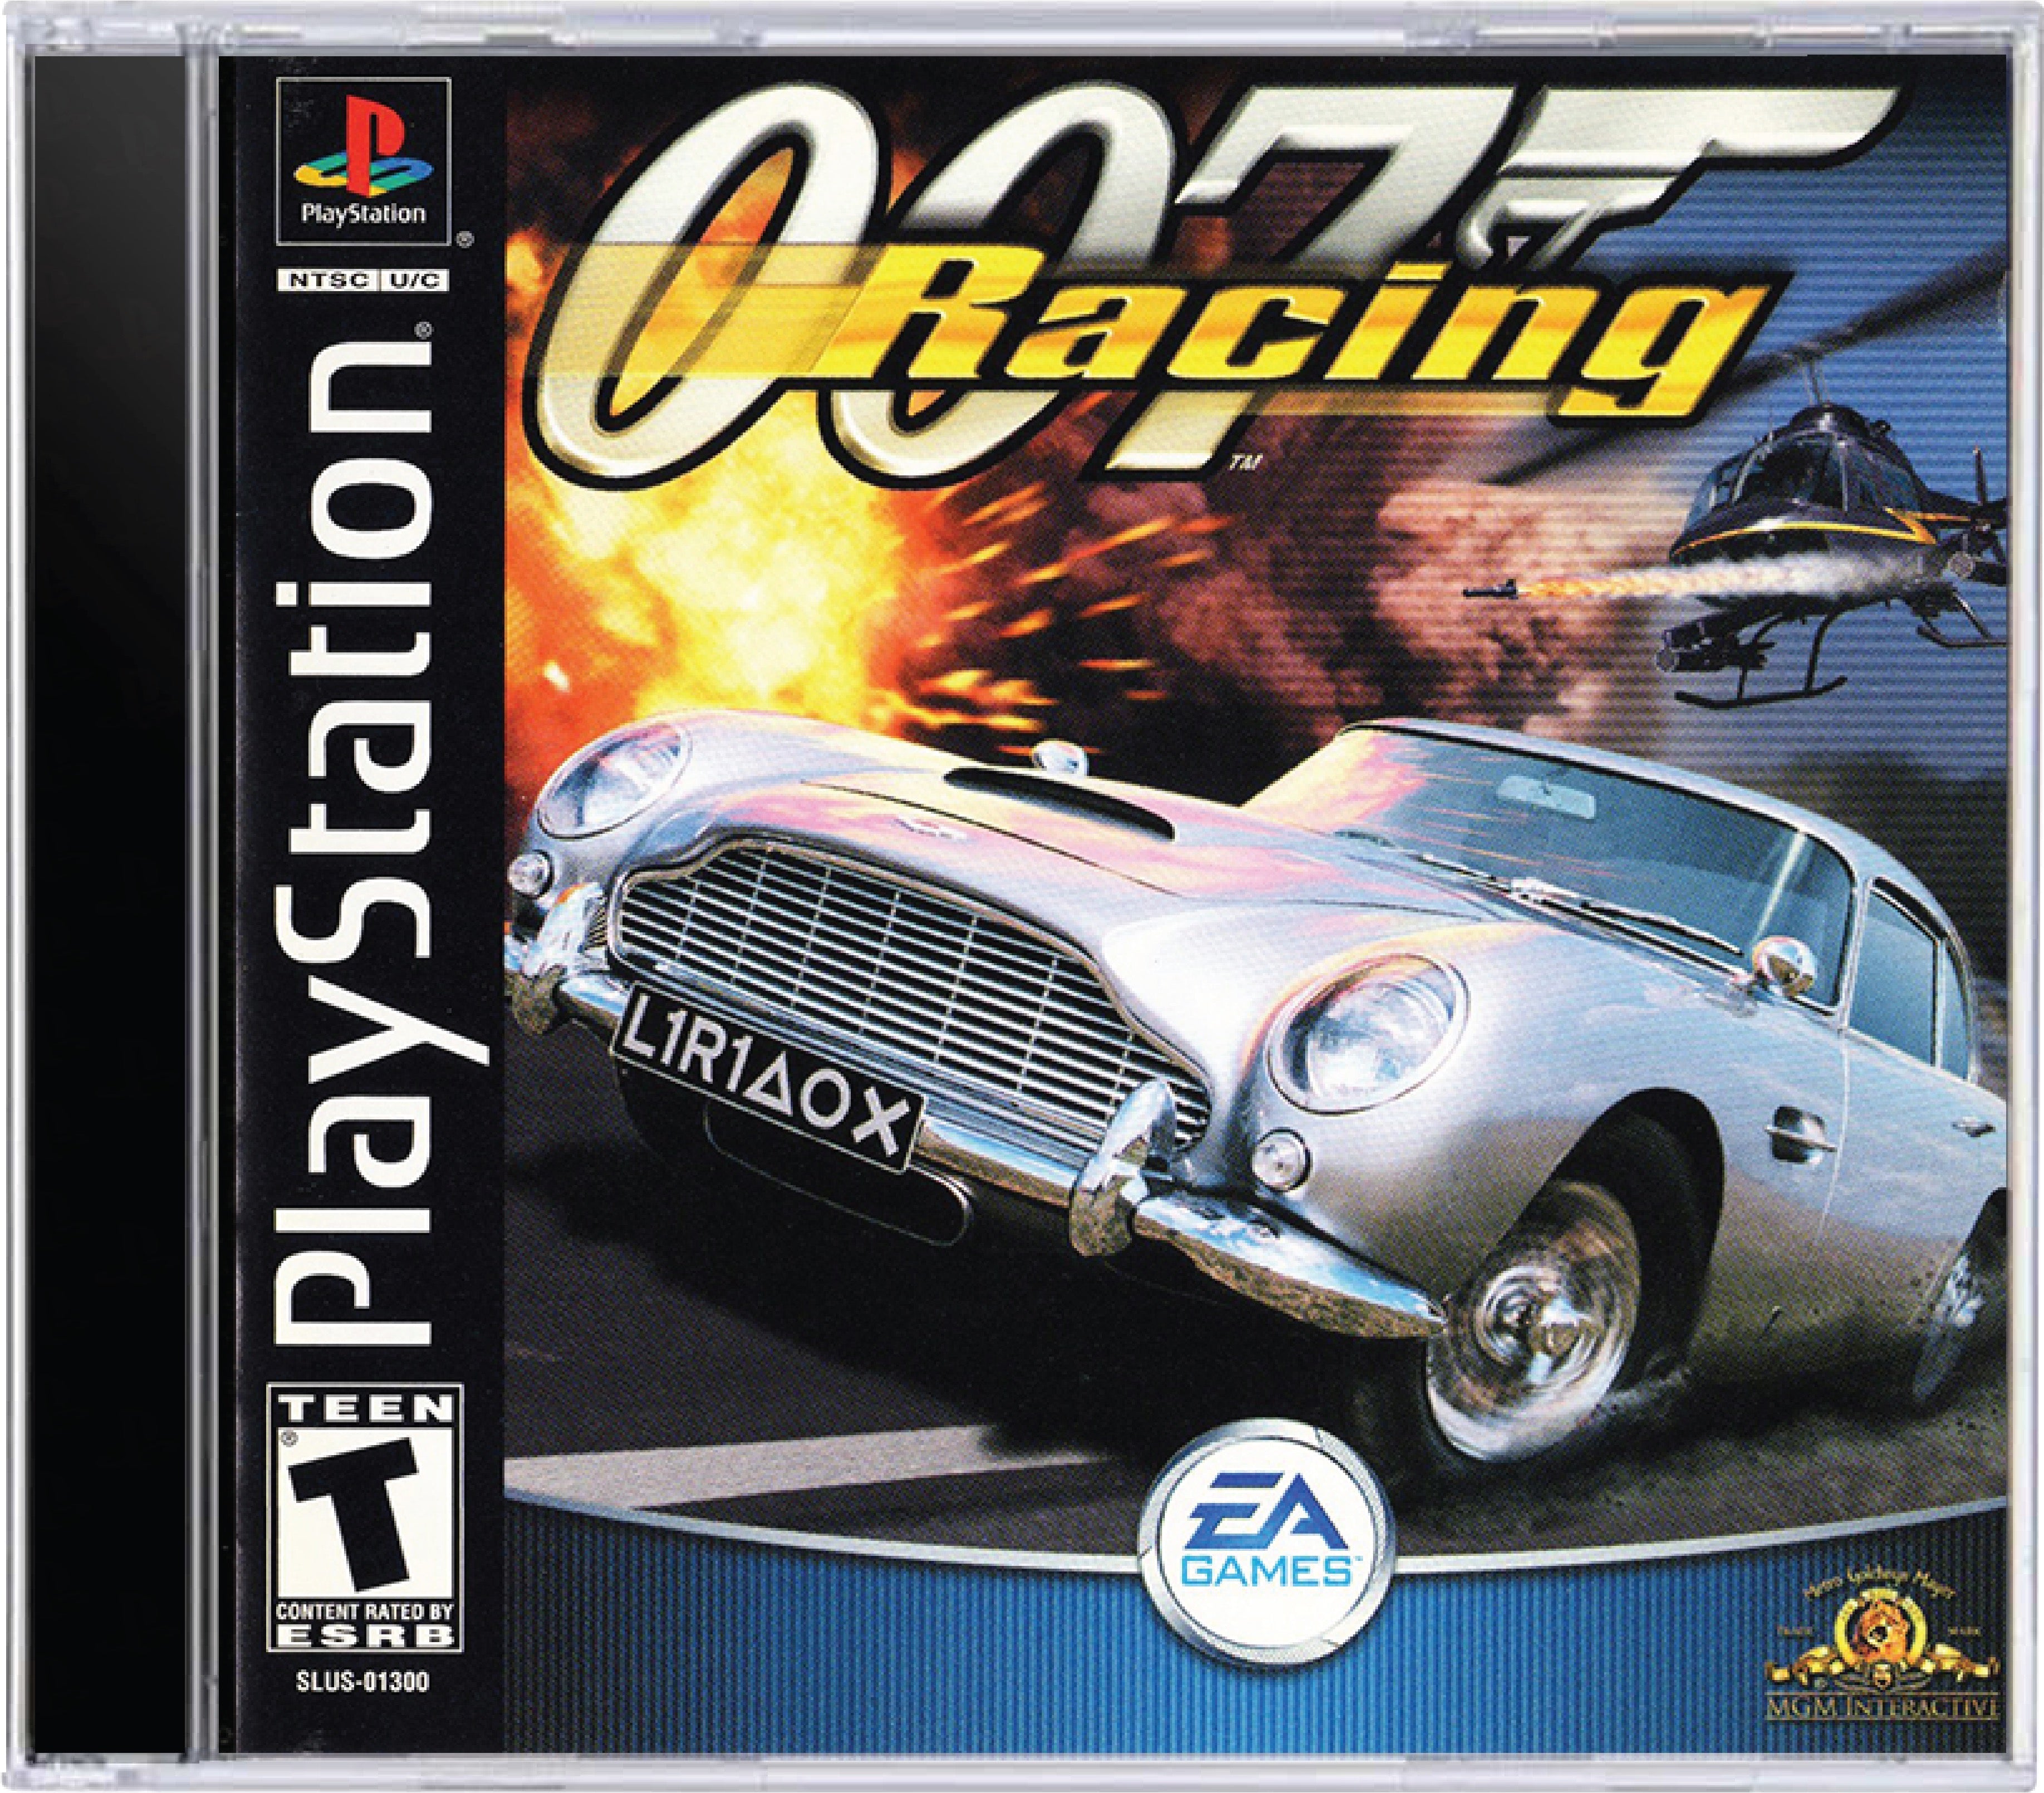 James Bond 007 Racing Cover Art and Product Photo